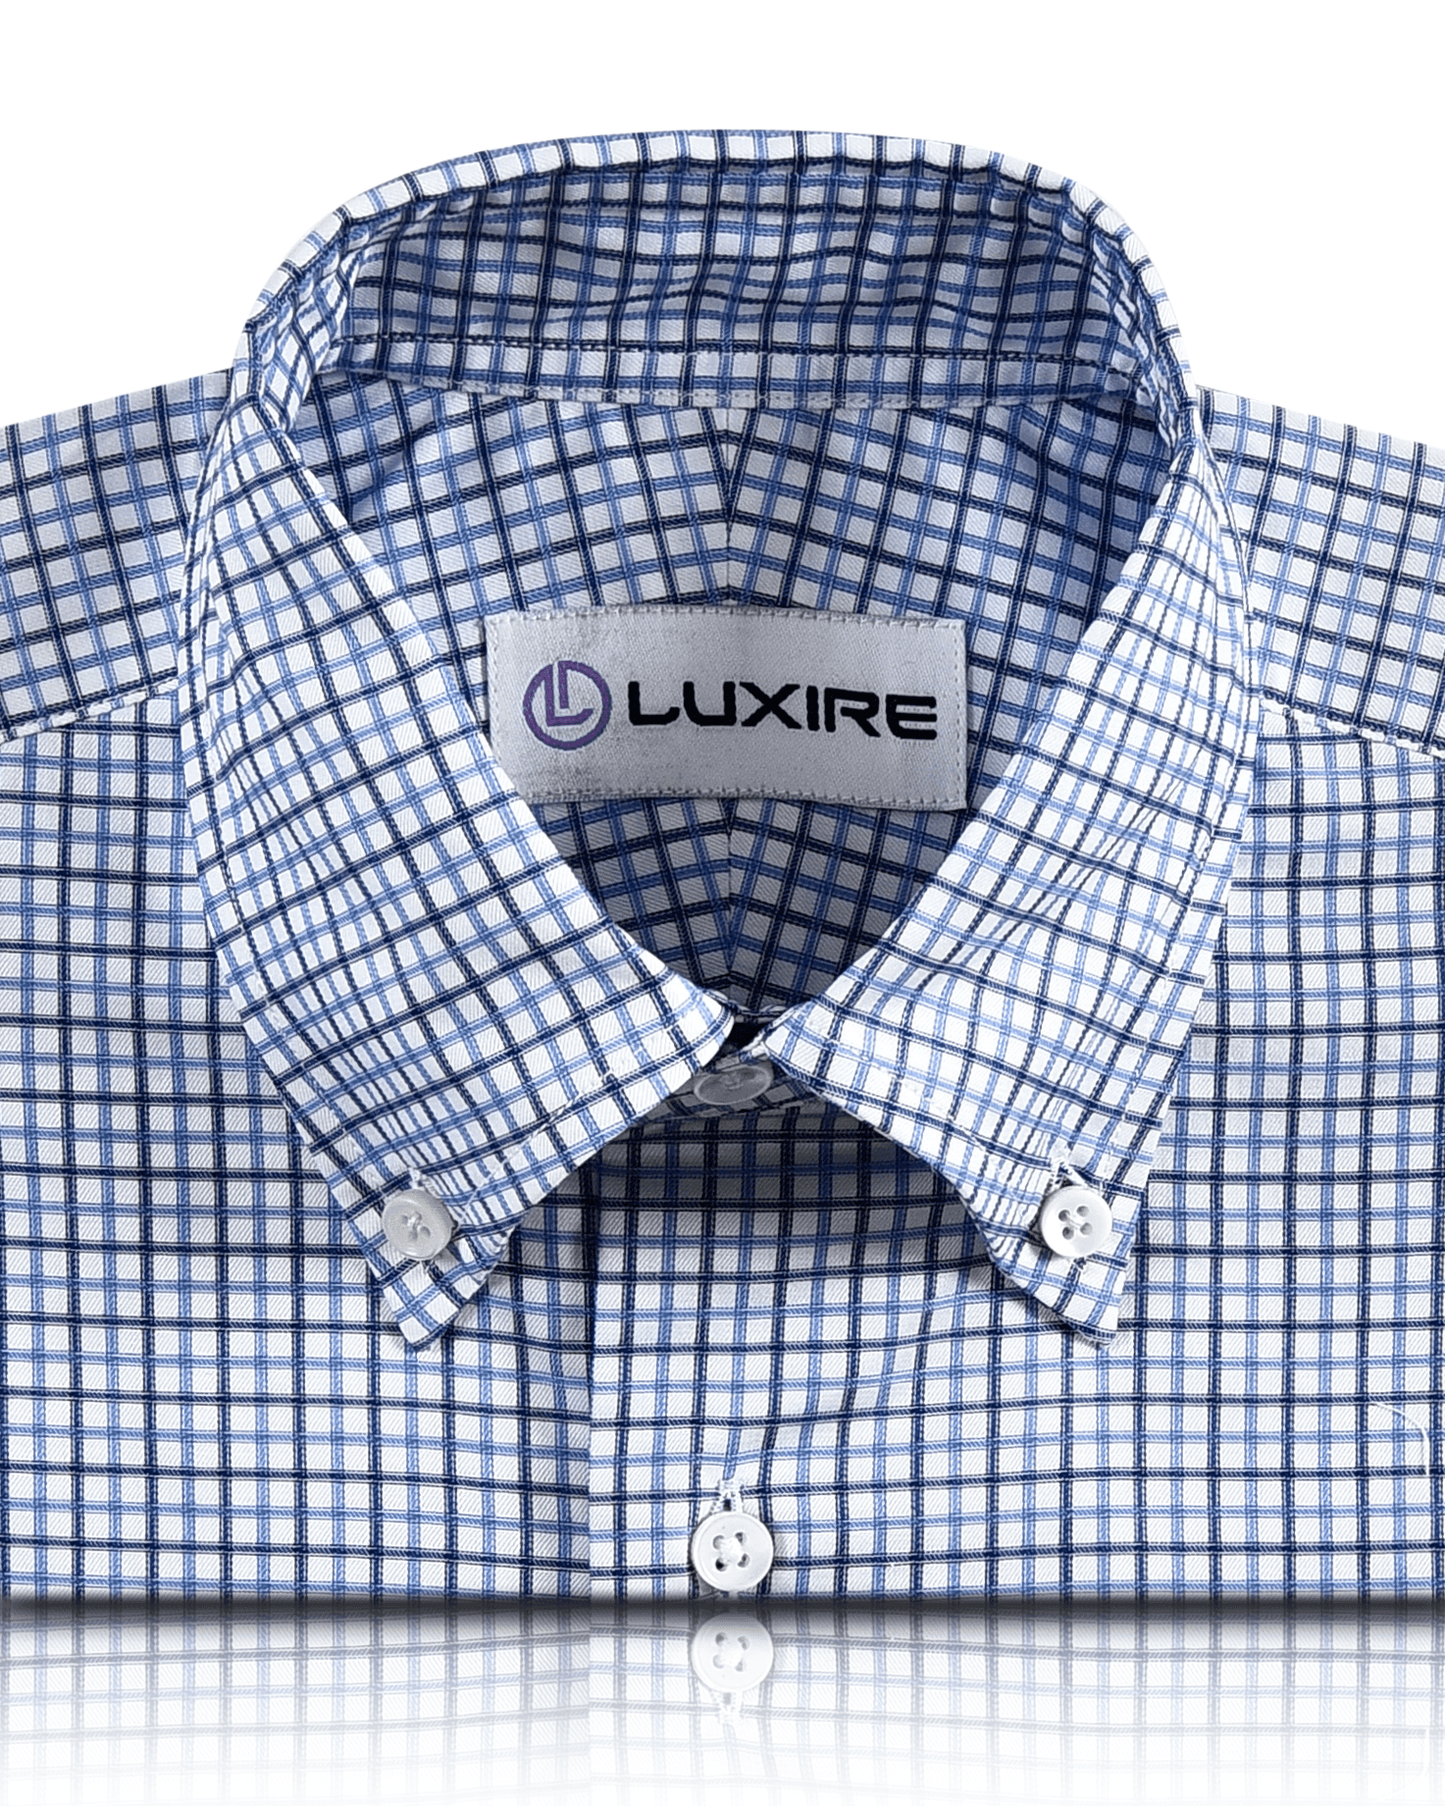 Front view of custom check shirts for men by Luxire in navy sky tattersall